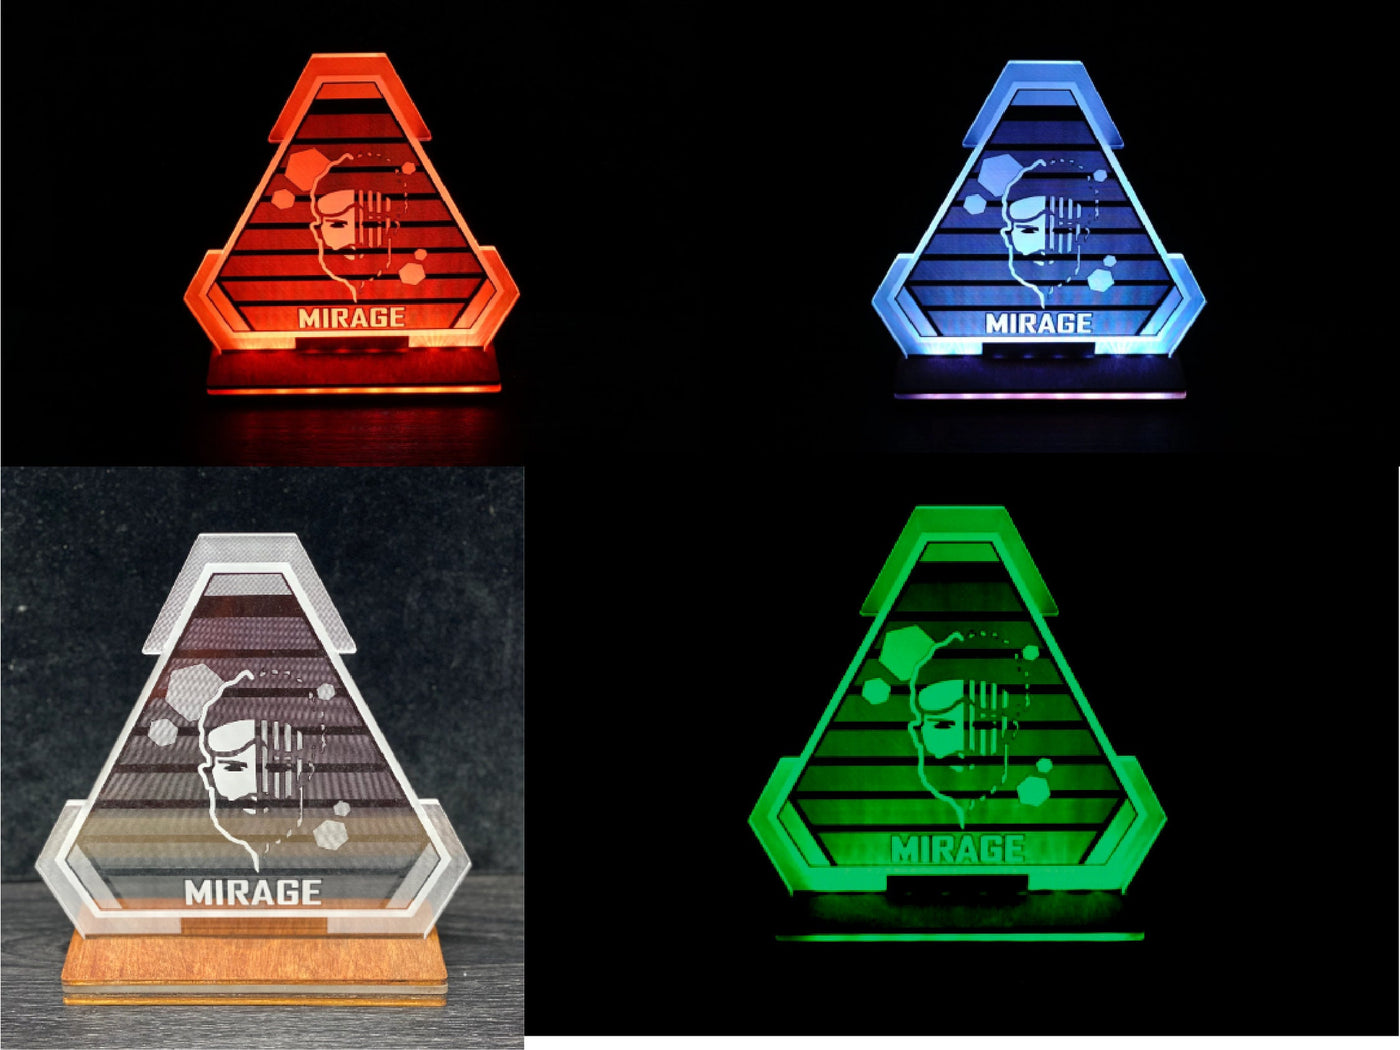 Apex Legends Ultimate | Mirage | Wraith | Caustic | Octane | Crypto | LED Illuminated night light perfect for desks, bars, man caves, dorms.